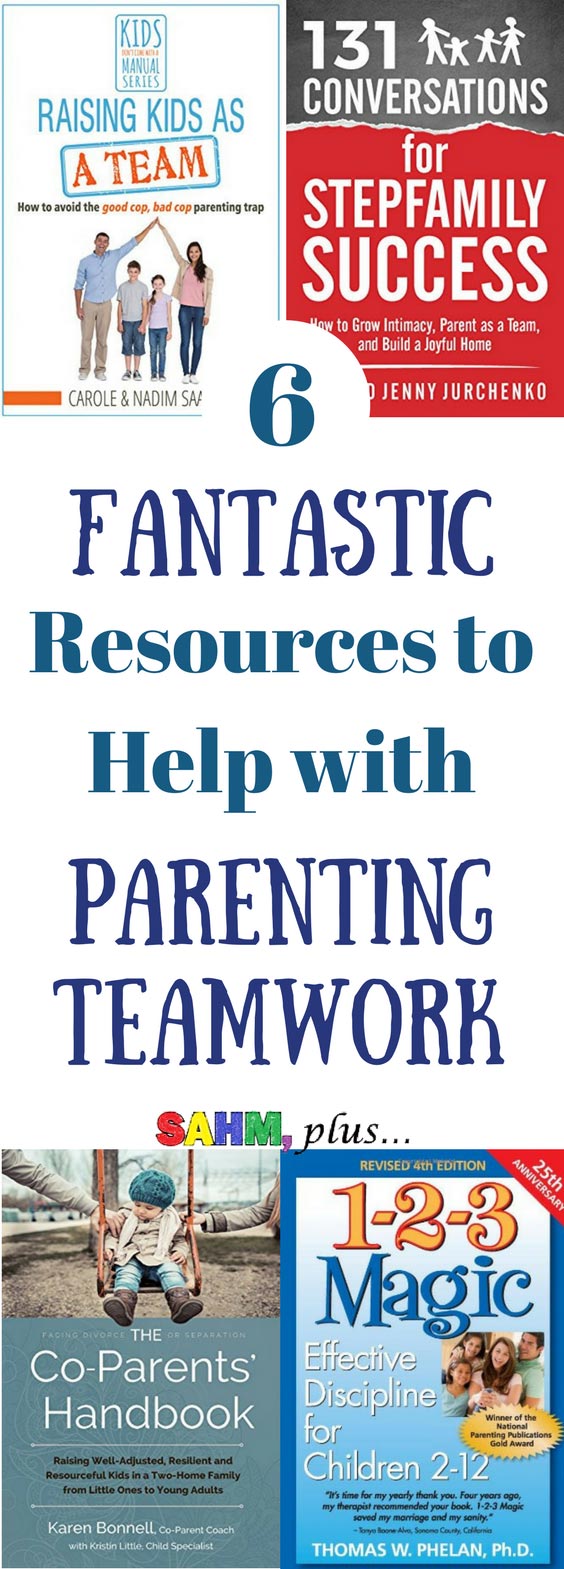 Struggling with parenting as a team? Check out these 6 amazing resources to help you parent as a team, regardless of your family dynamics